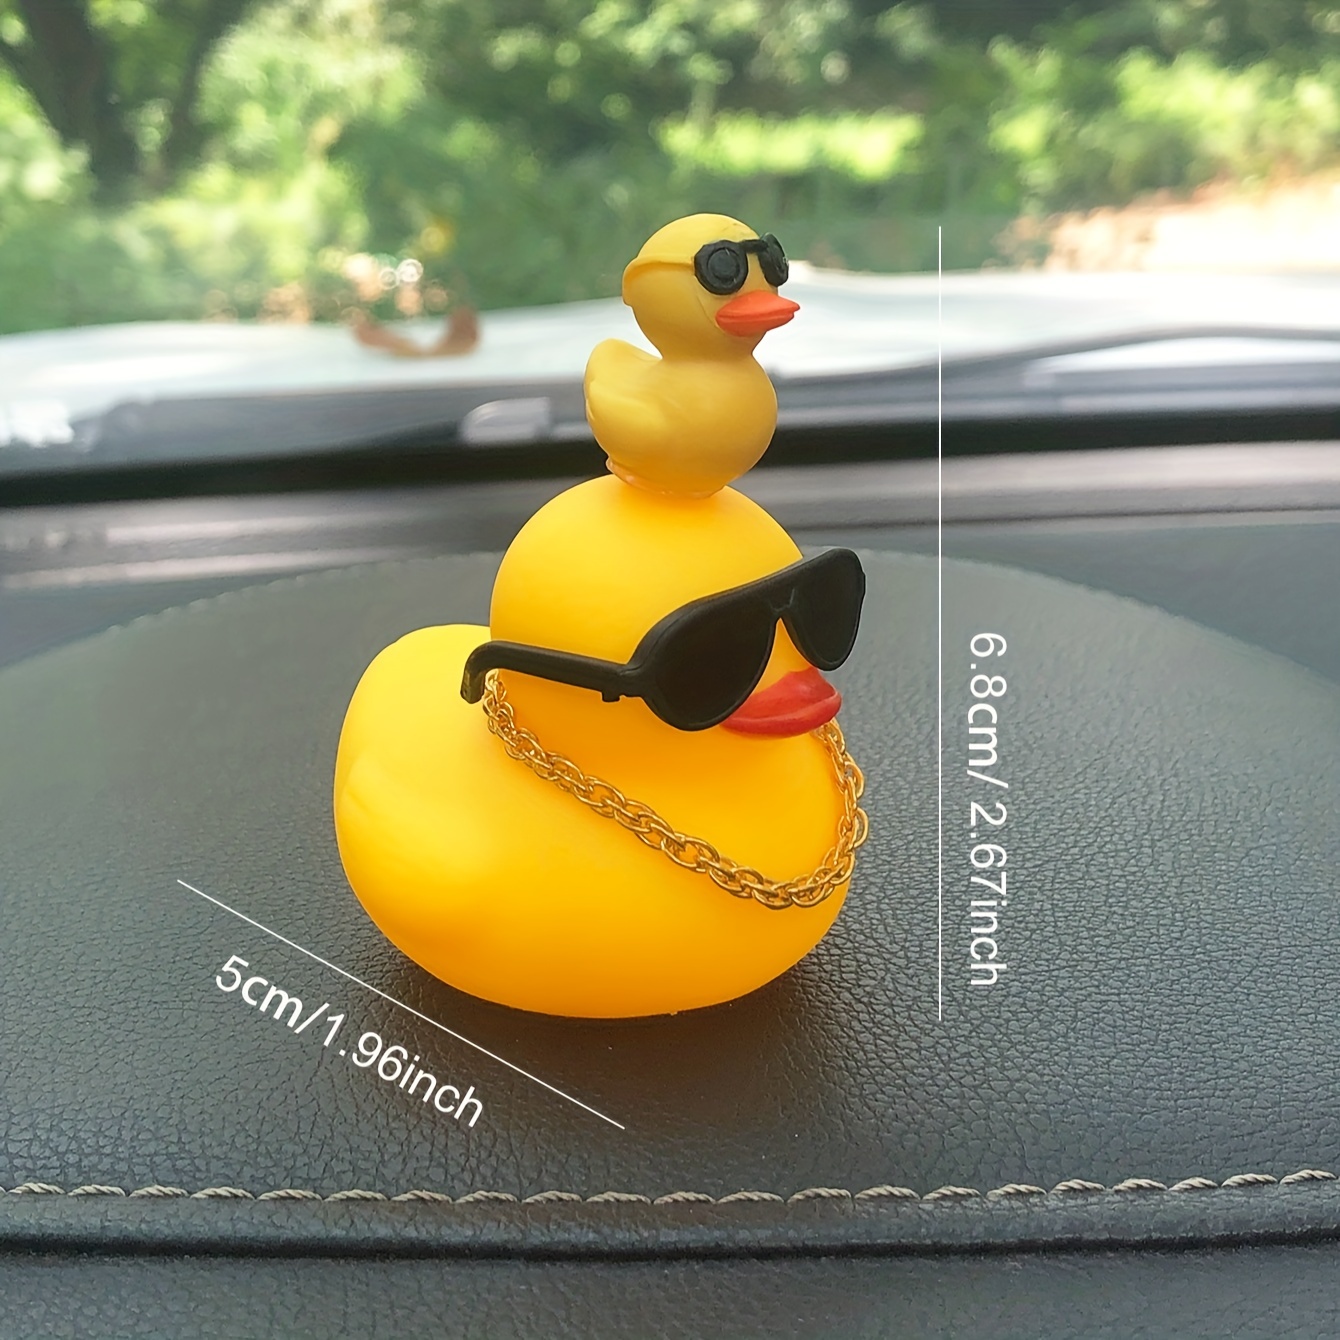 LUTER 1PC Rubber Duck Car Duck Decoration Dashboard, Little Yellow Rubber  Duck with Gold Chain Hats and Donut Sunglasses for Car Office Bedroom Desk